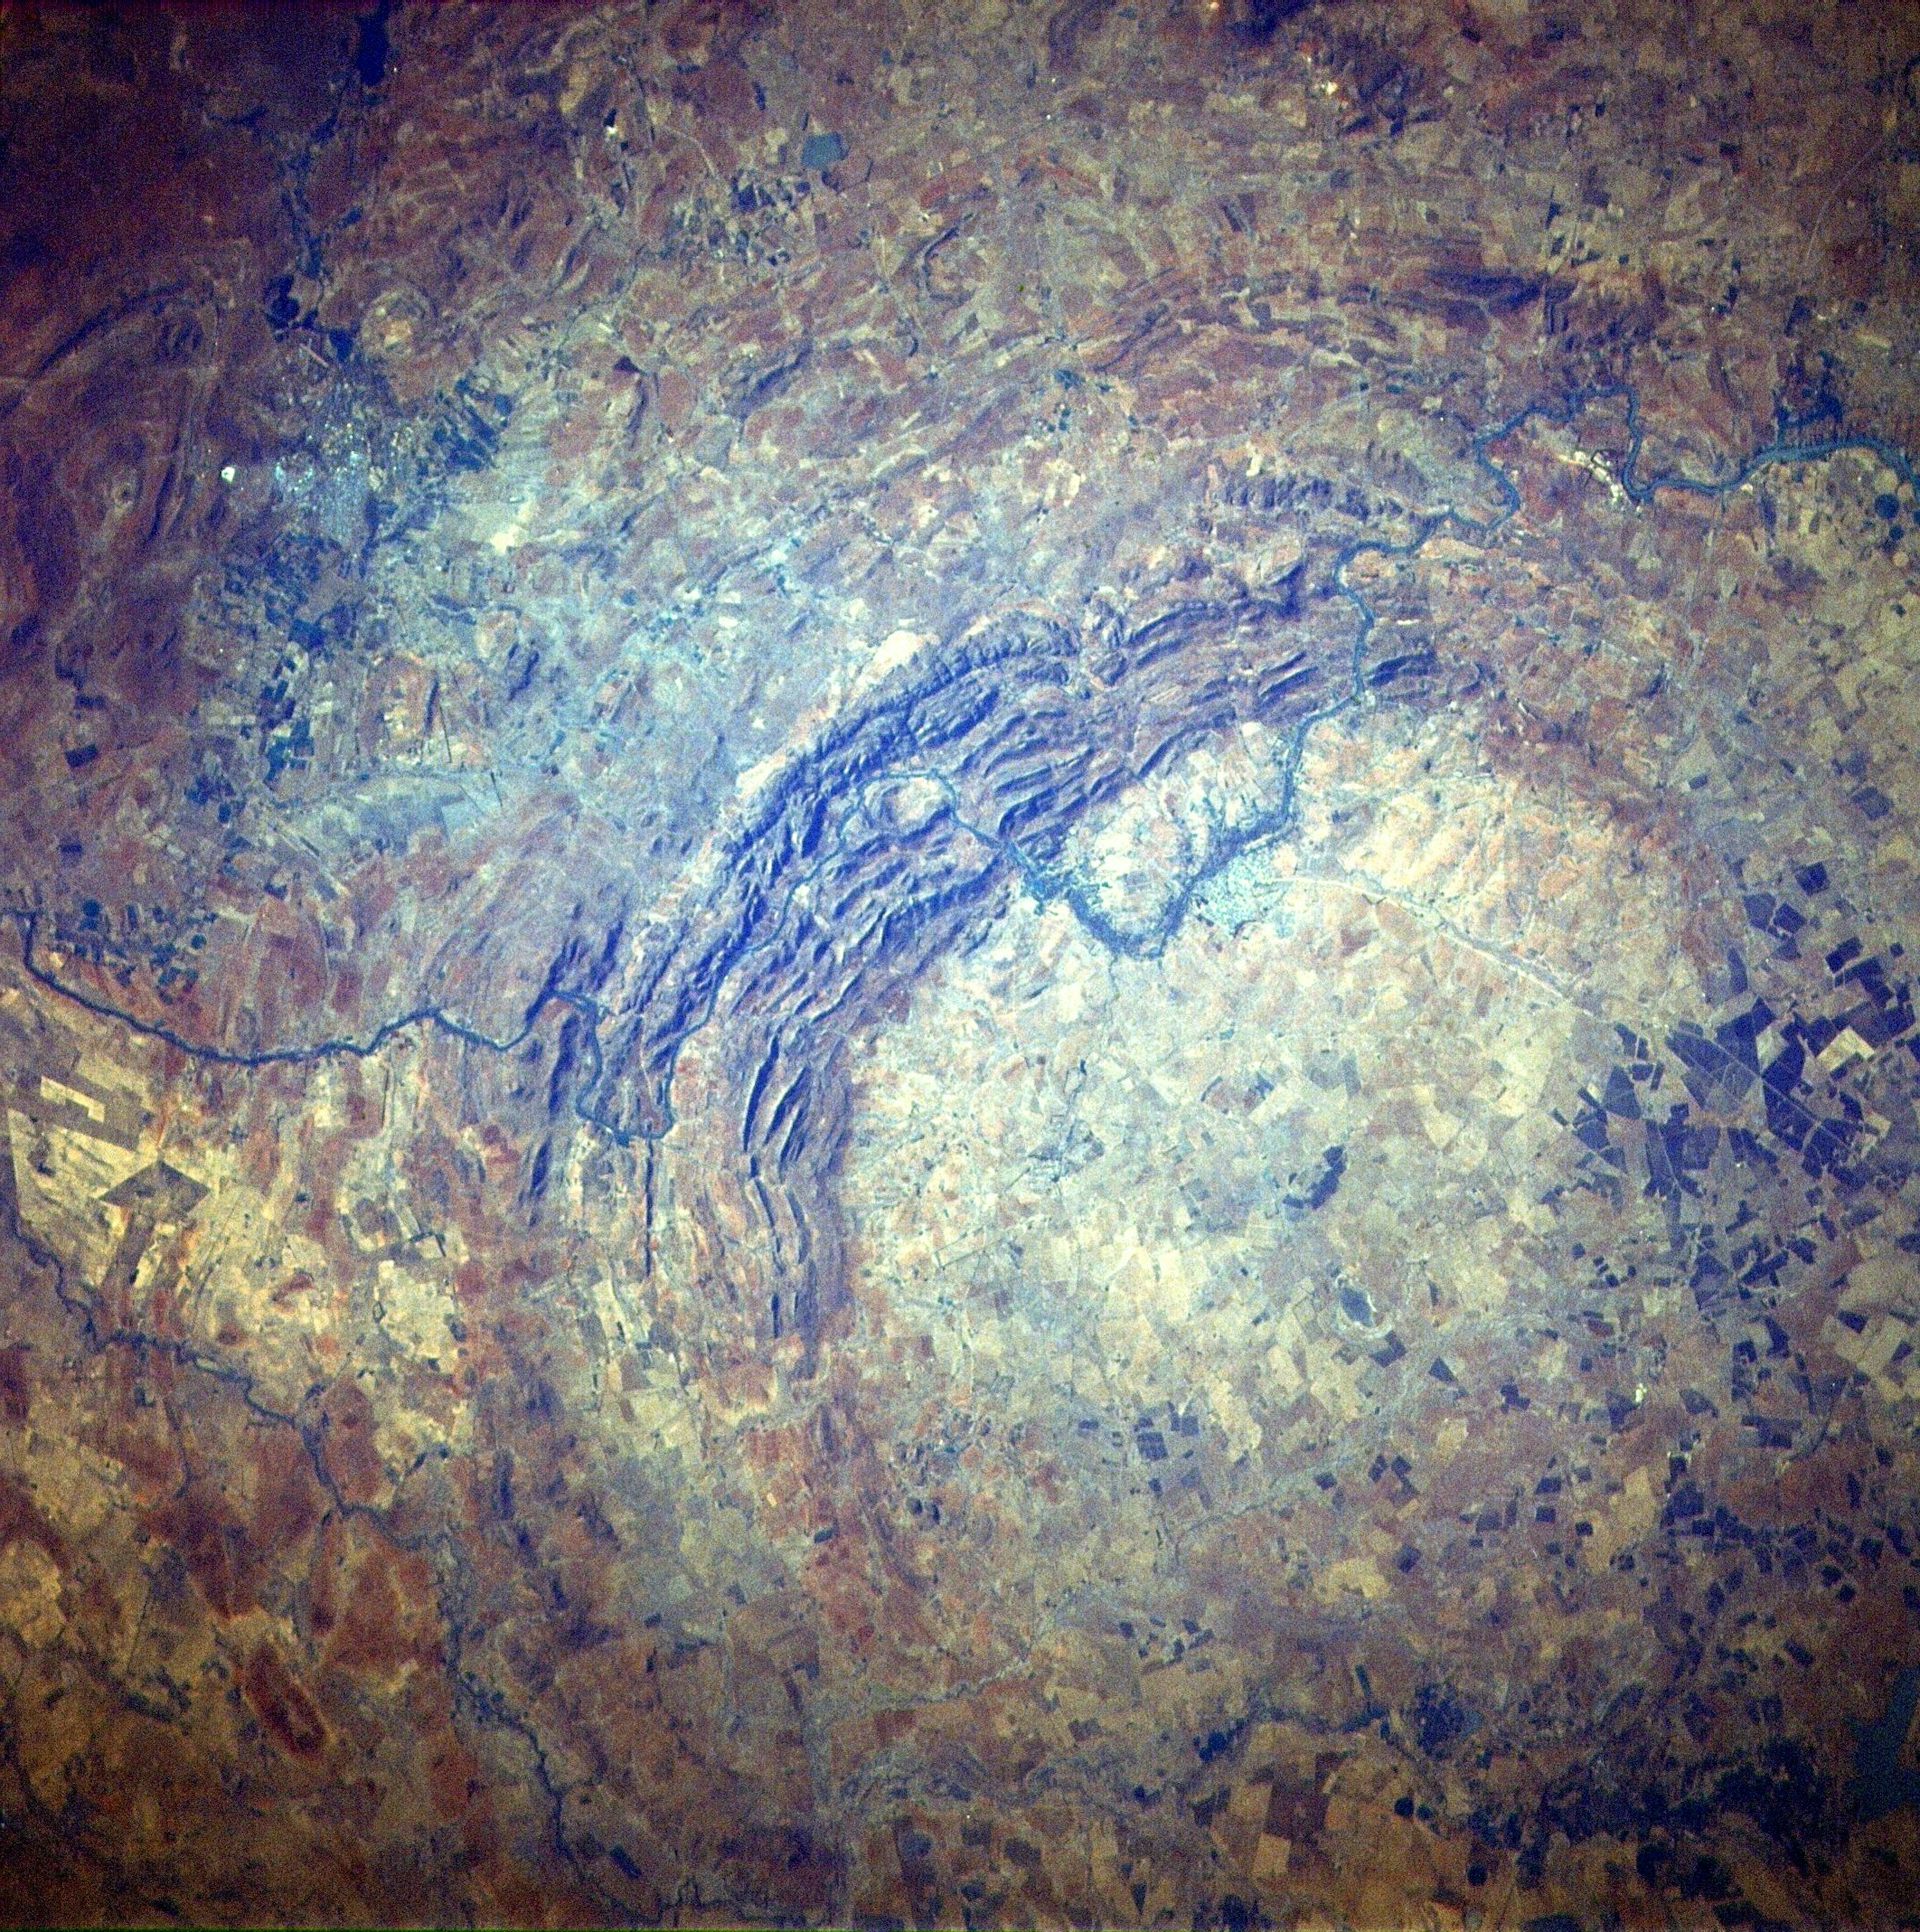 A large rocky circle on a red landscape seen from above.